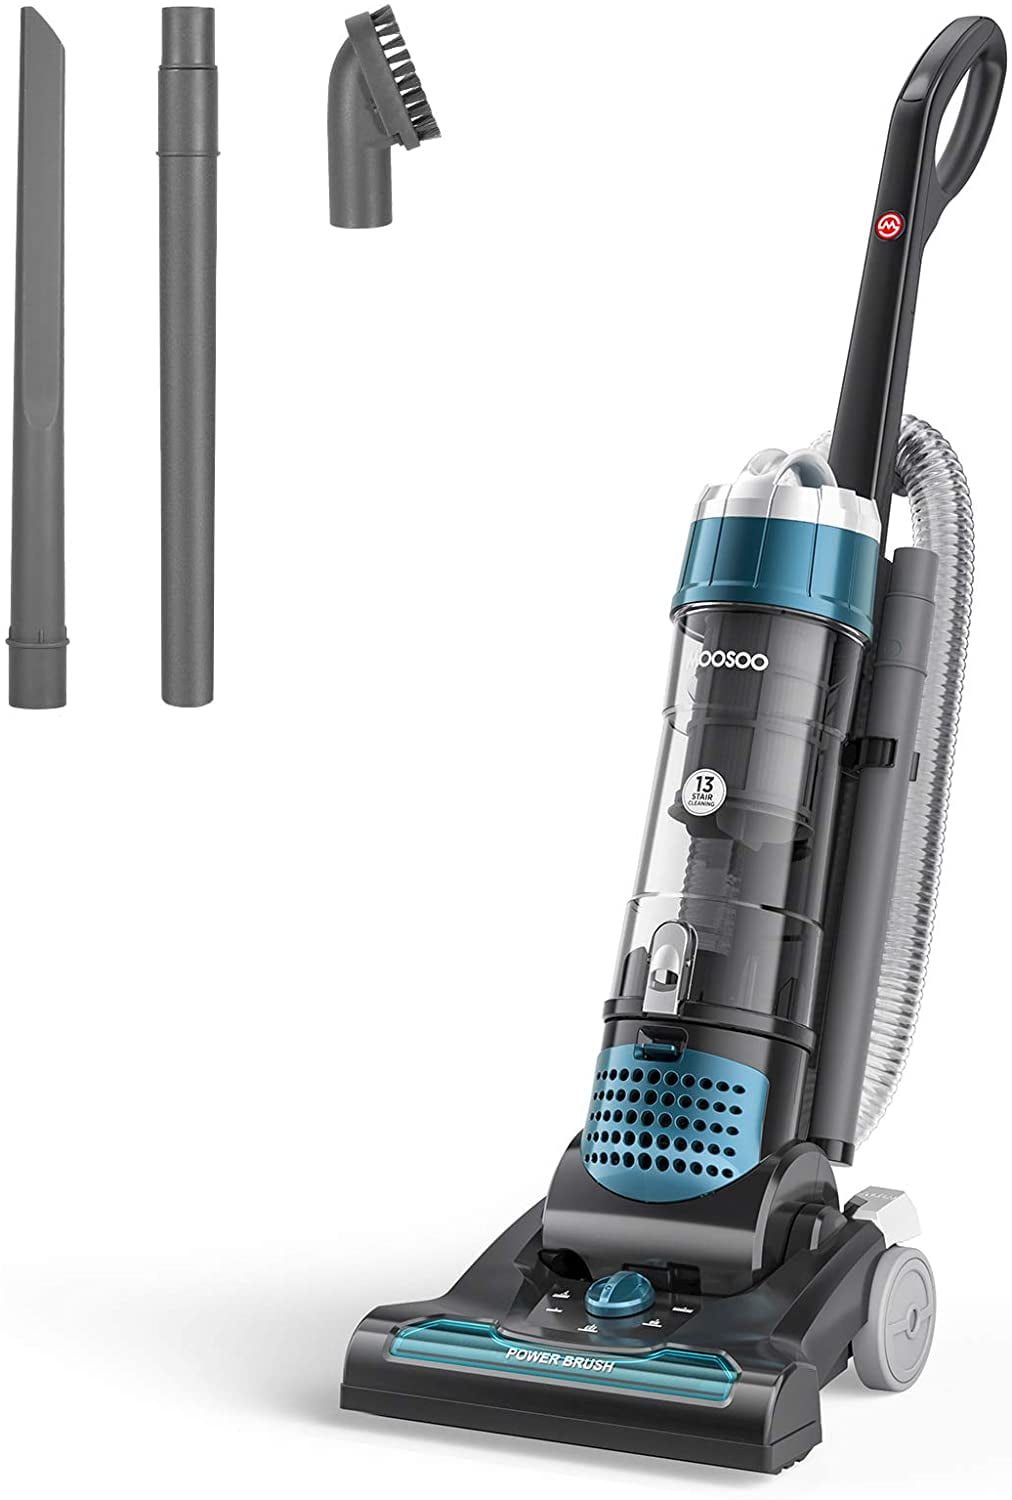 for Pets Hair and Home MOOSOO Cordless Upright Vacuum Cleaner Model: U26D 26Kpa Strong Suction Upright Bagless Vacuum /  50 Min-Running with H12 Level Upgraded Cyclone Anti-Allergy Seal Filtering